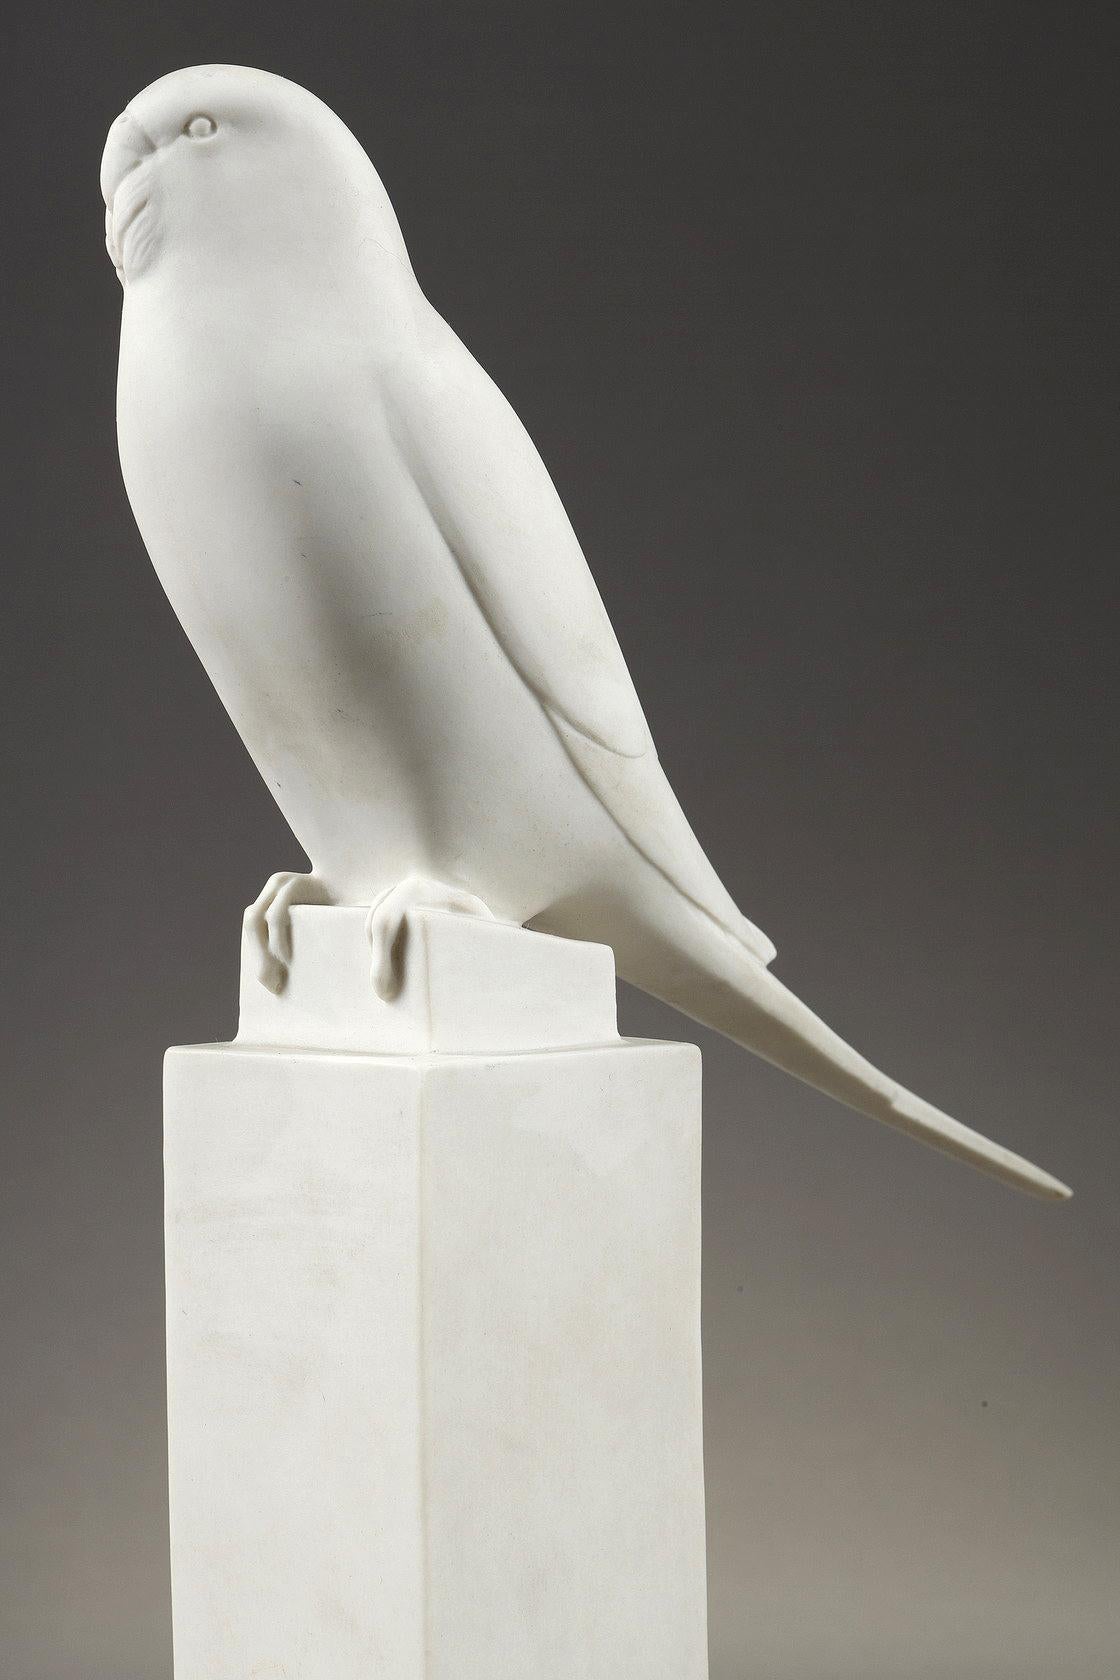 Parrotlet
by Armand PETERSEN (1891-1969) & SEVRES Manufacture

Sculpture in white paste porcelain
Signed « A. Petersen »
Old edition artwork. Stamped by the porcelain manufacture of Sèvres

France
Model created in 1932
Edited by the Sèvres